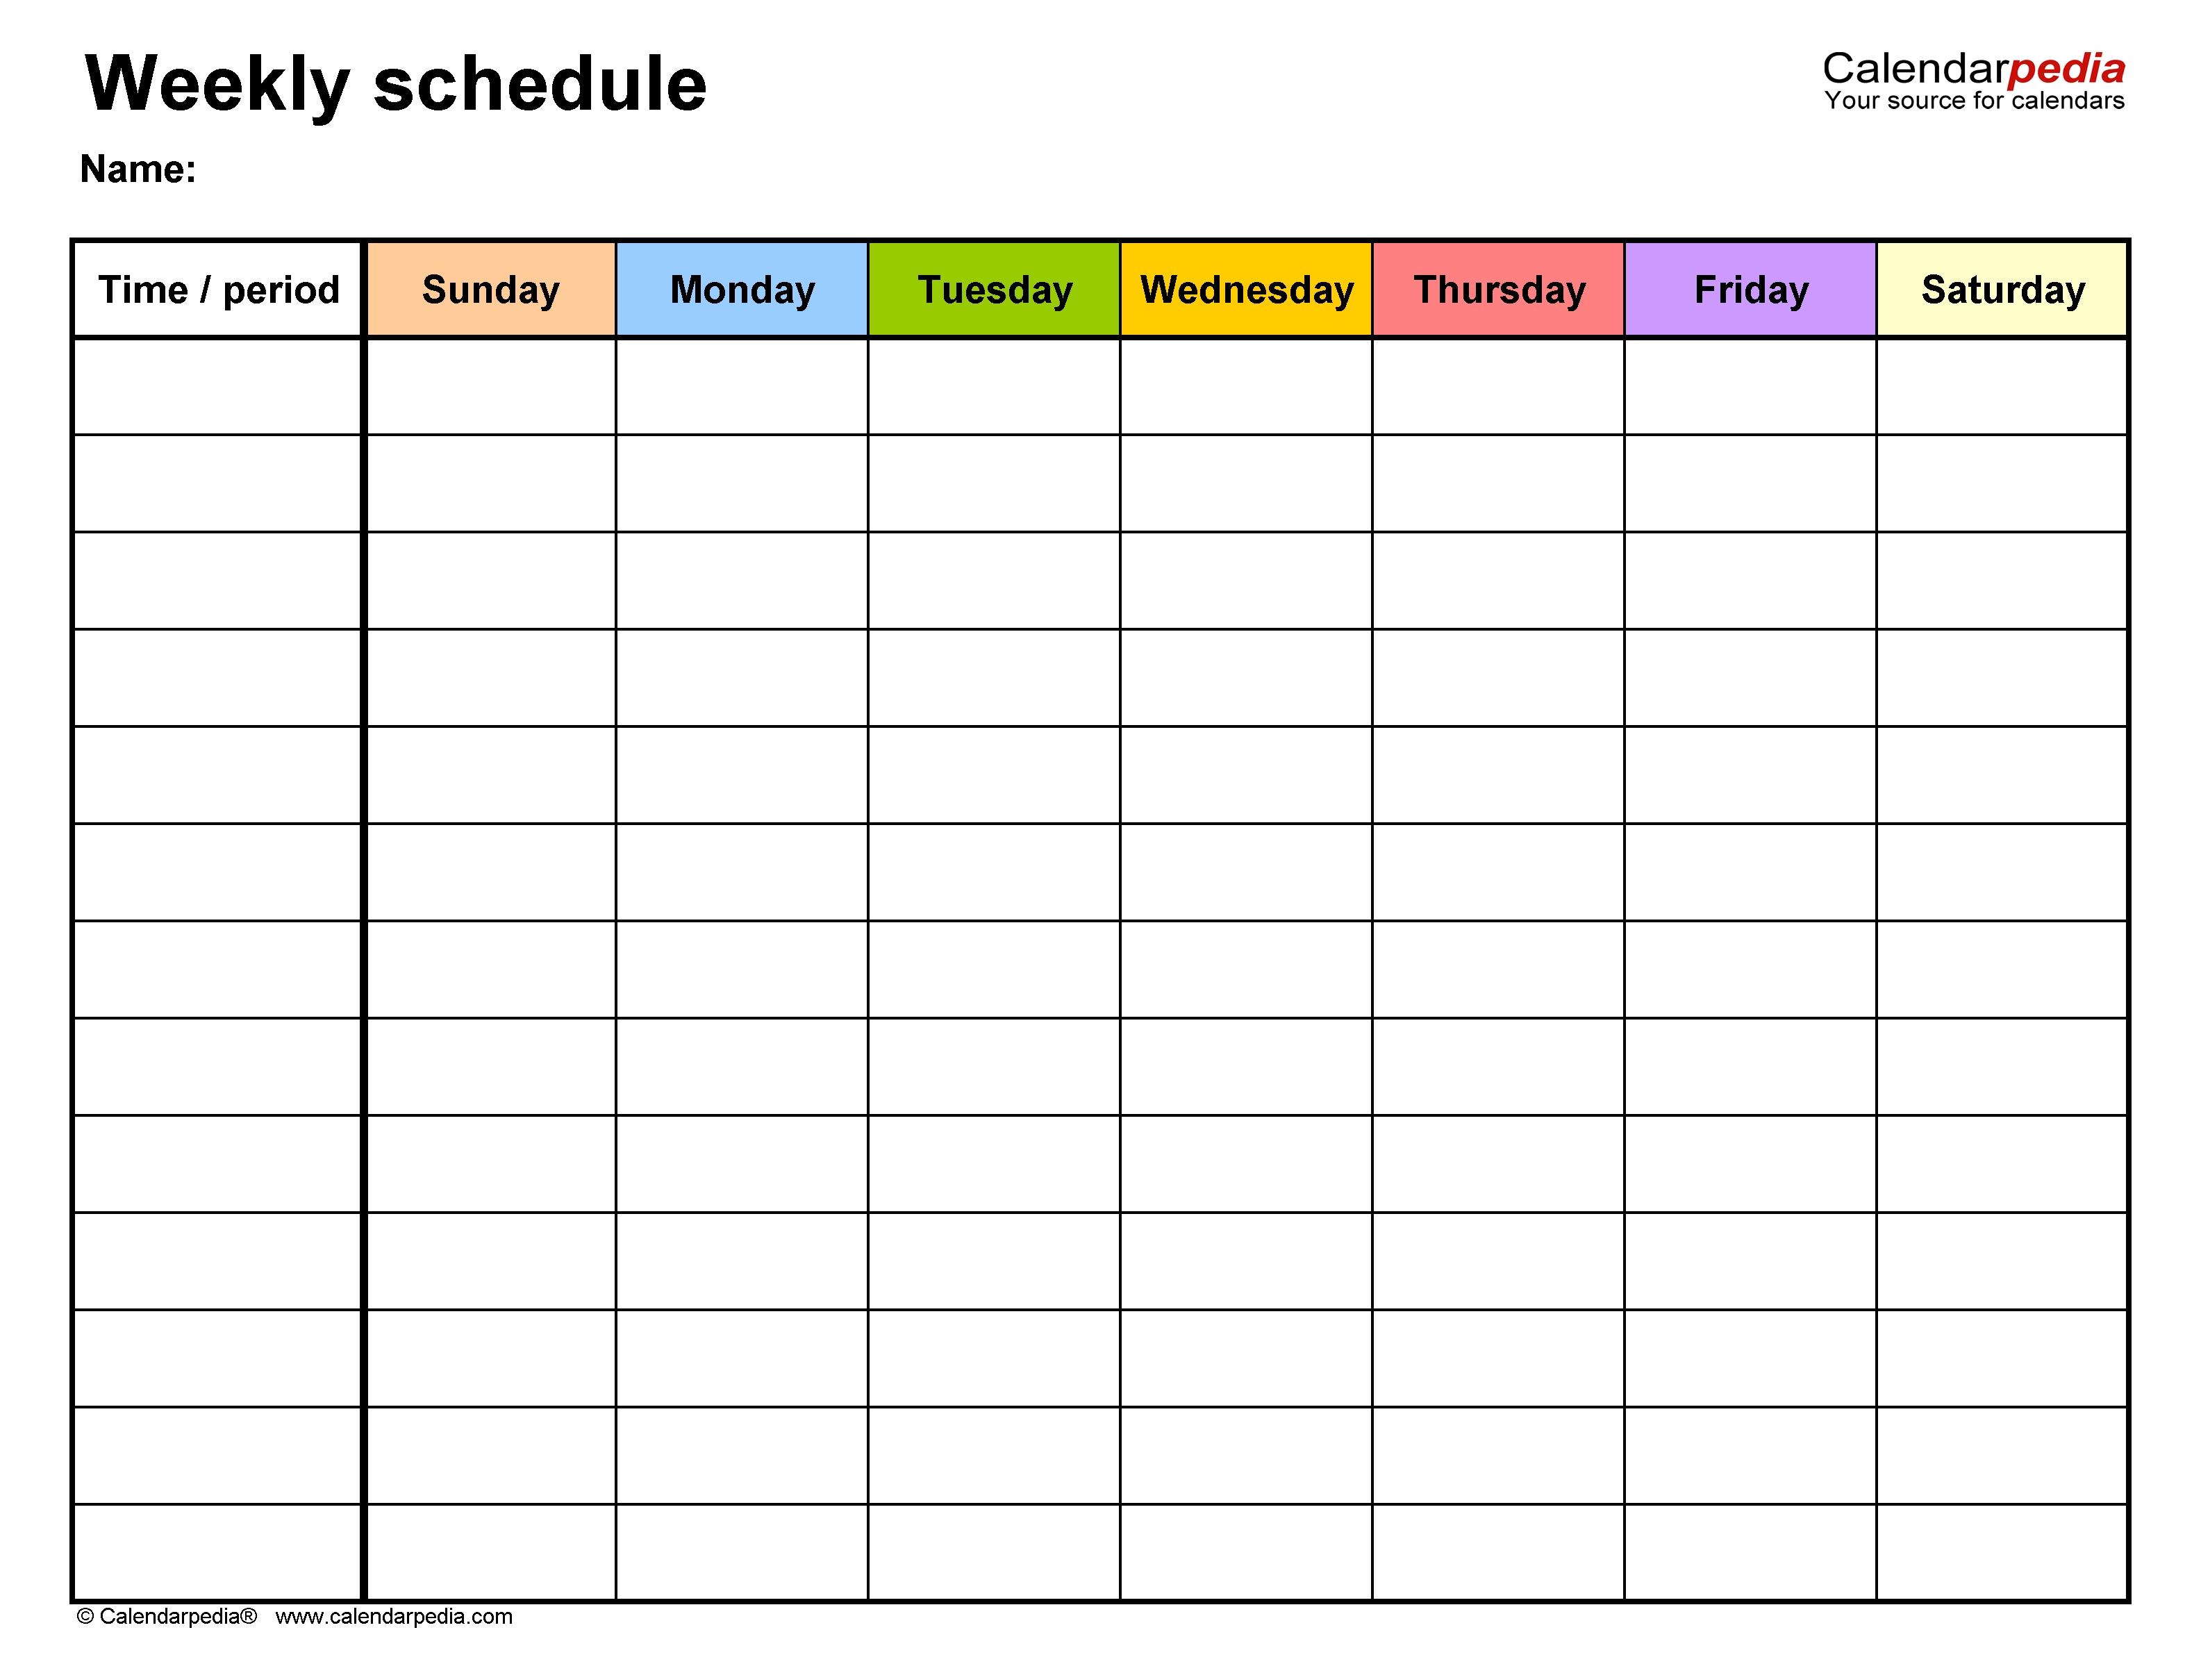 Free Weekly Schedule Templates For Word - 18 Templates  Editable Weekly Schedule